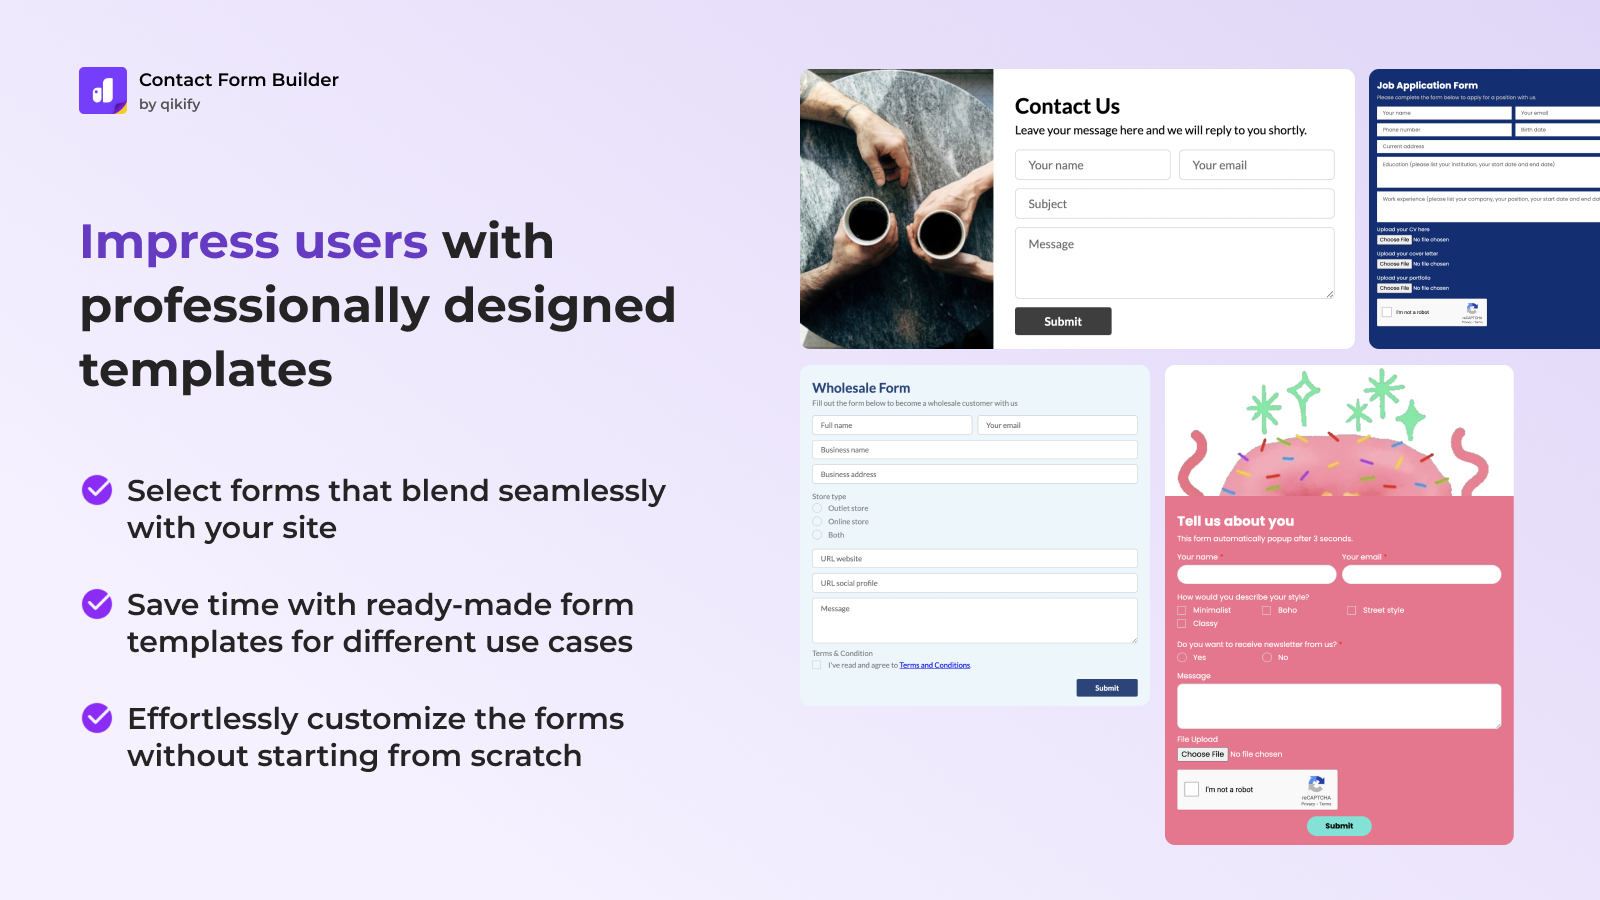 Impress users with professionally designed templates